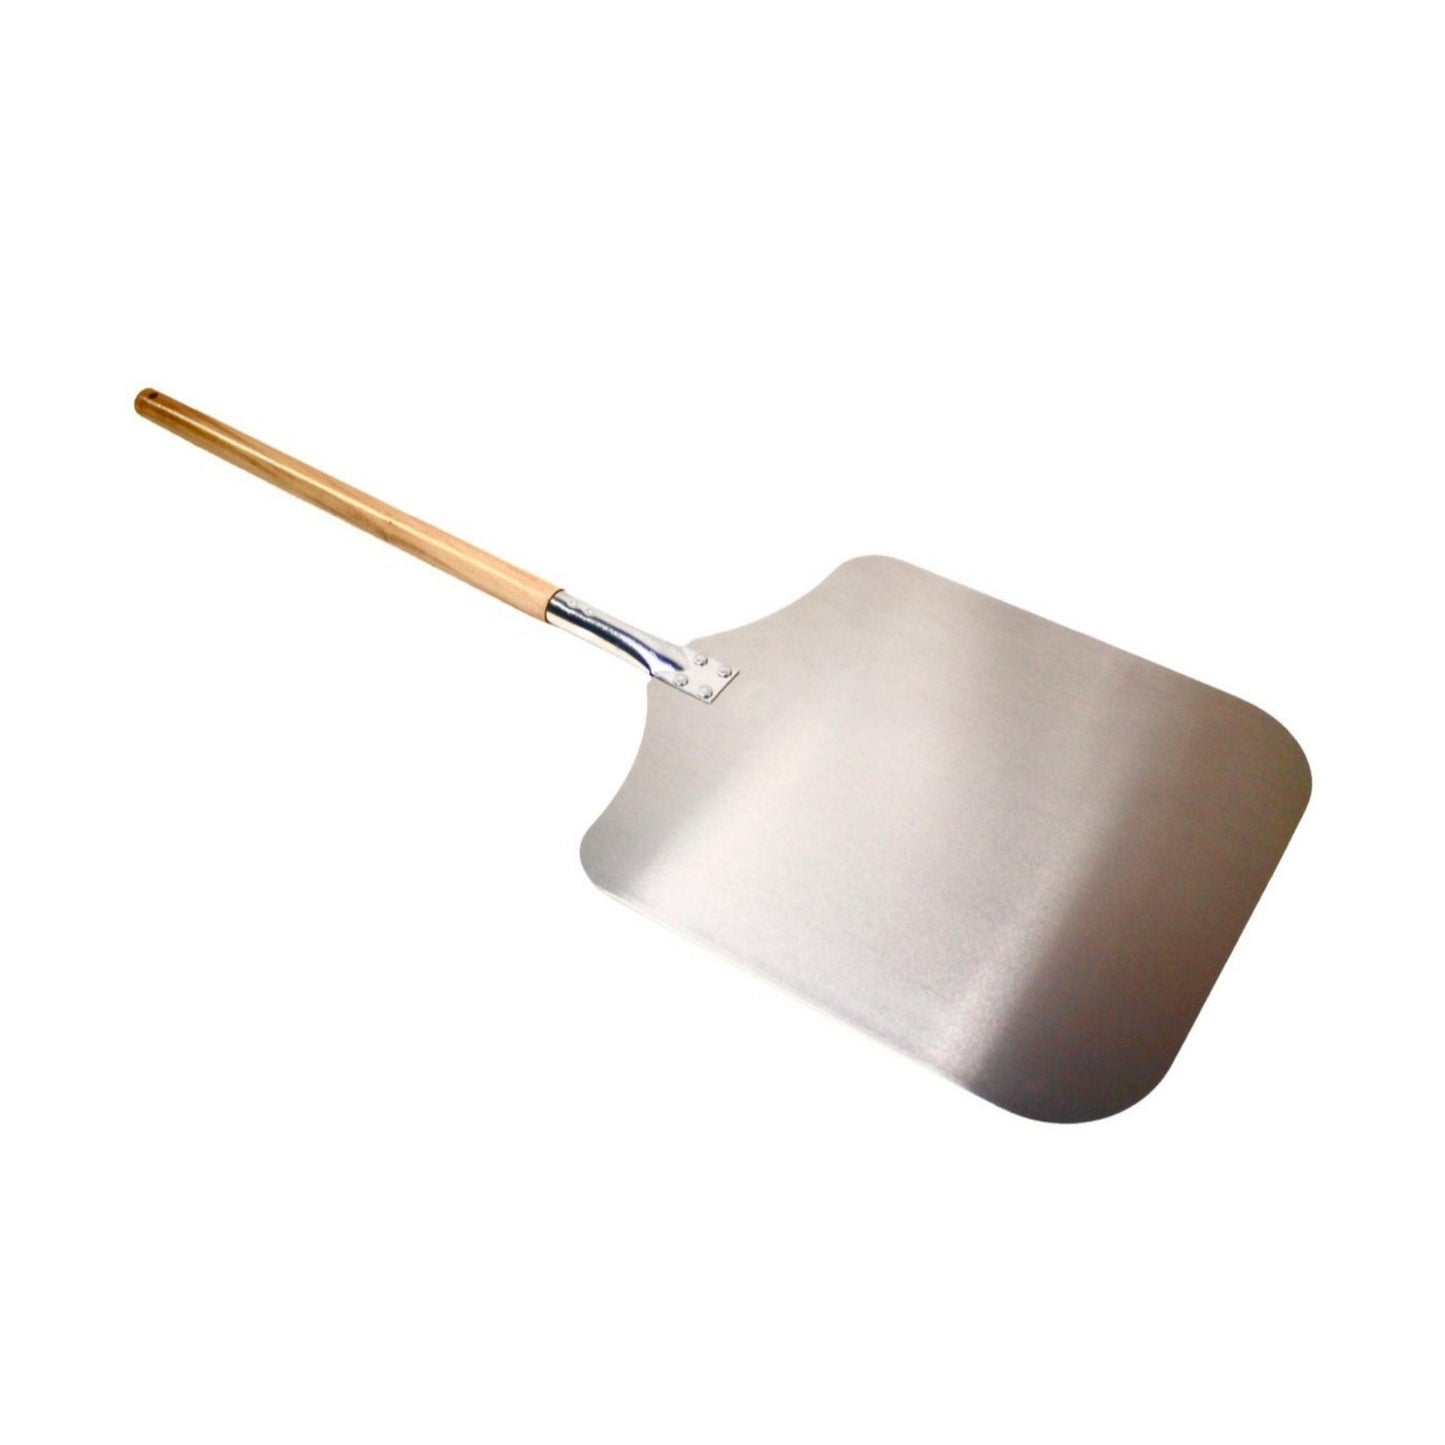 Choice 16 x 18 Aluminum Pizza Peel with 12 Wooden Handle